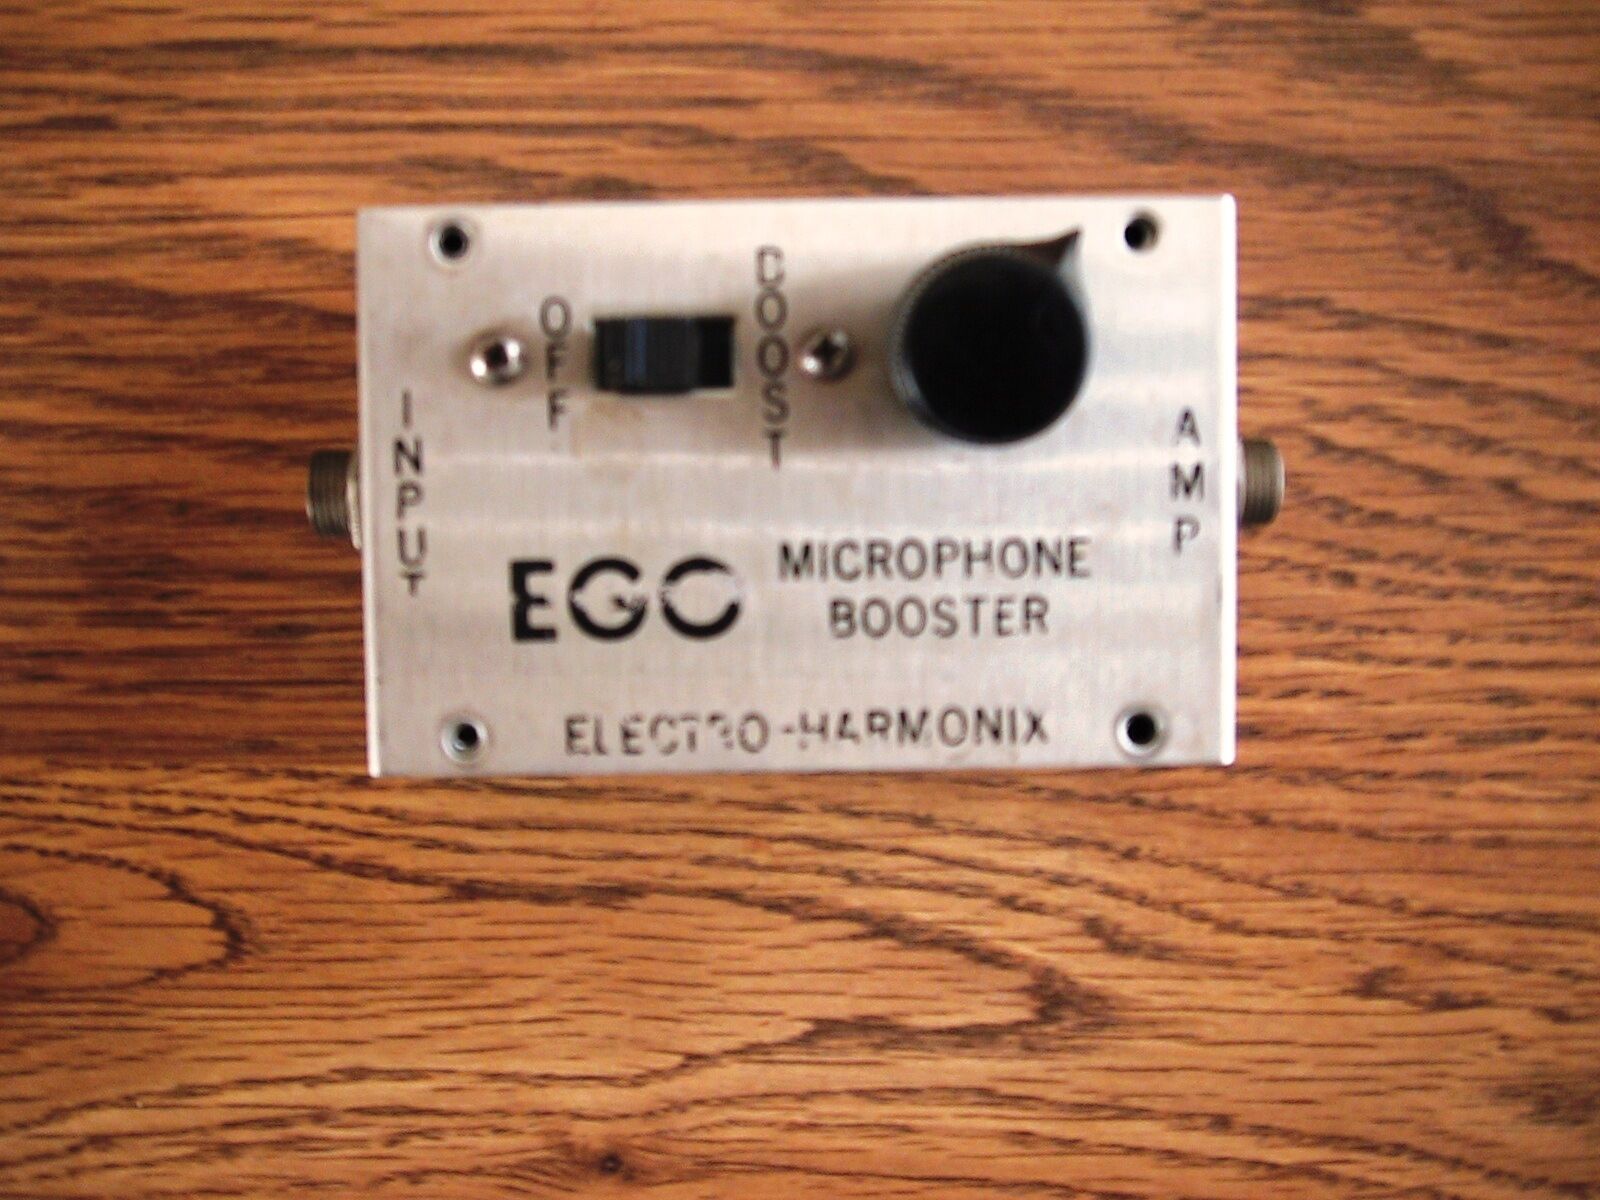 Vintage - Rare 60\'s ELECTRO-HARMONIX EGO MICROPHONE (or guitar) BOOSTER